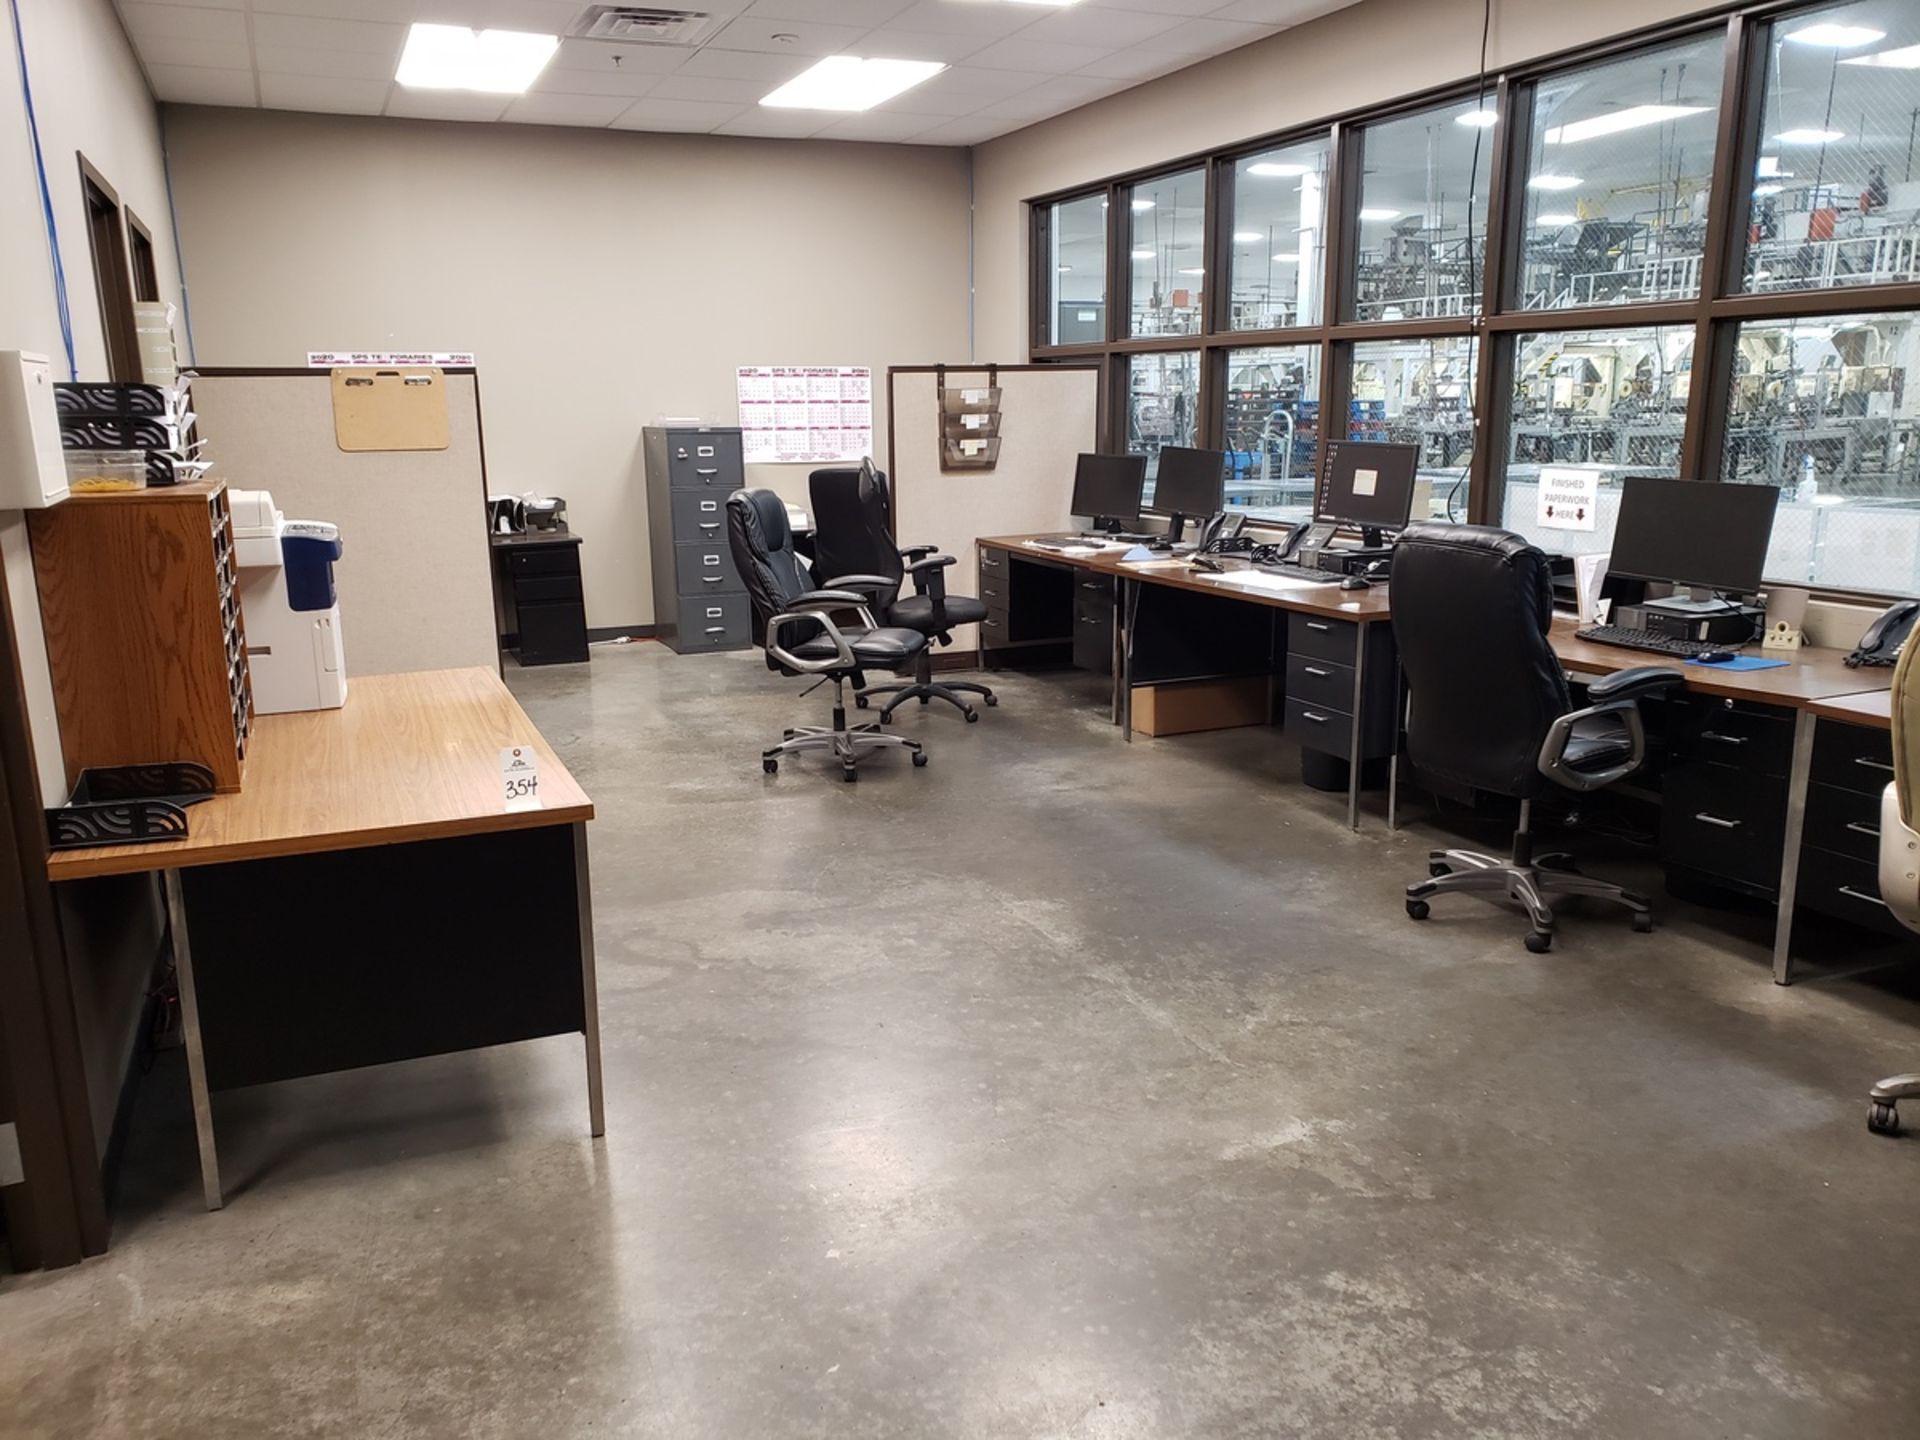 Contents of Production Offices (To Exclude Personal Computers and Paper Work) | Rig Fee: $100